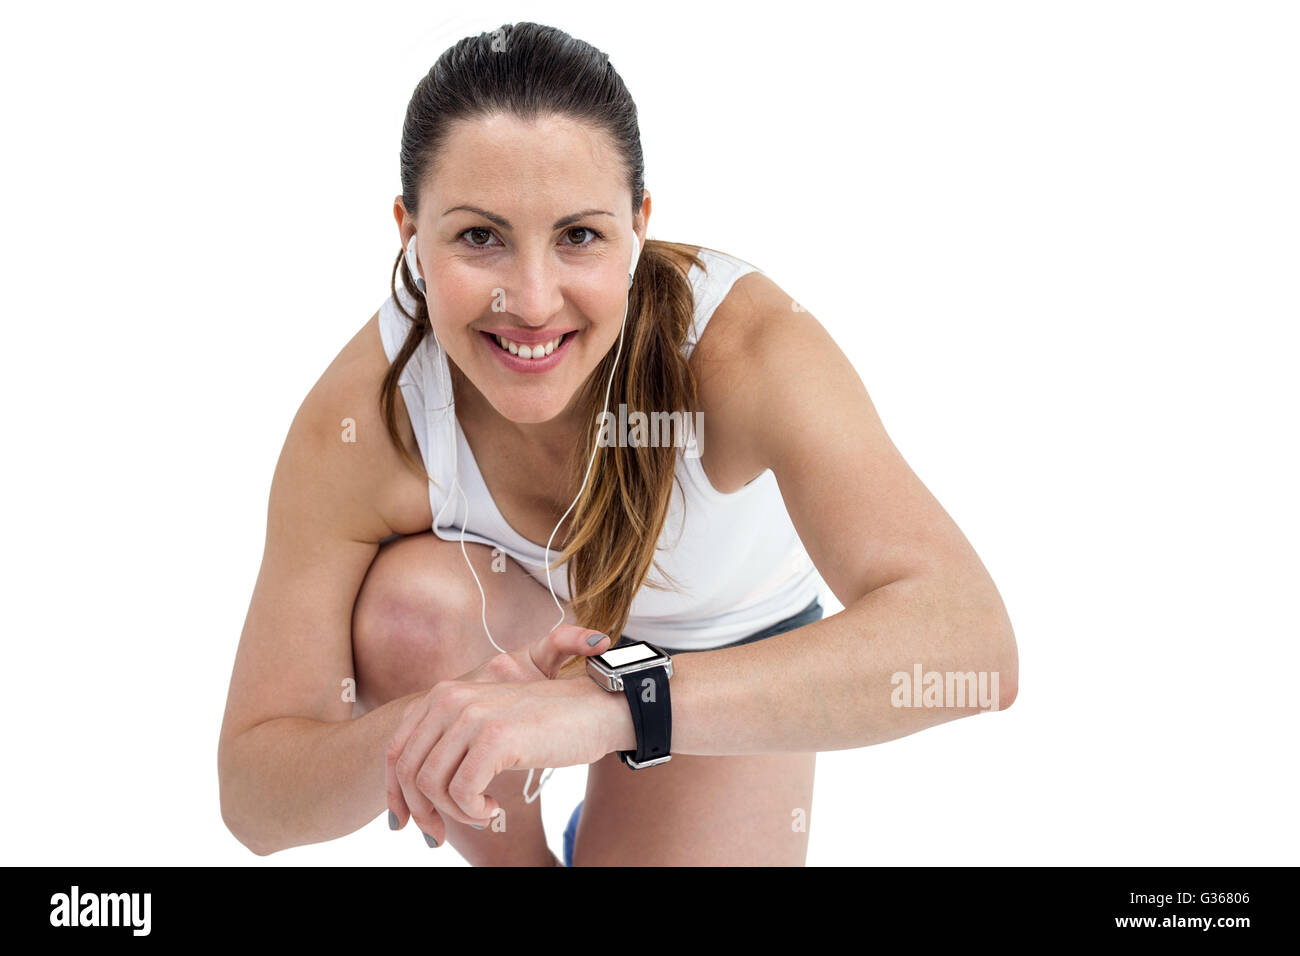 Portrait of athlete woman checking time in wrist watch Stock Photo